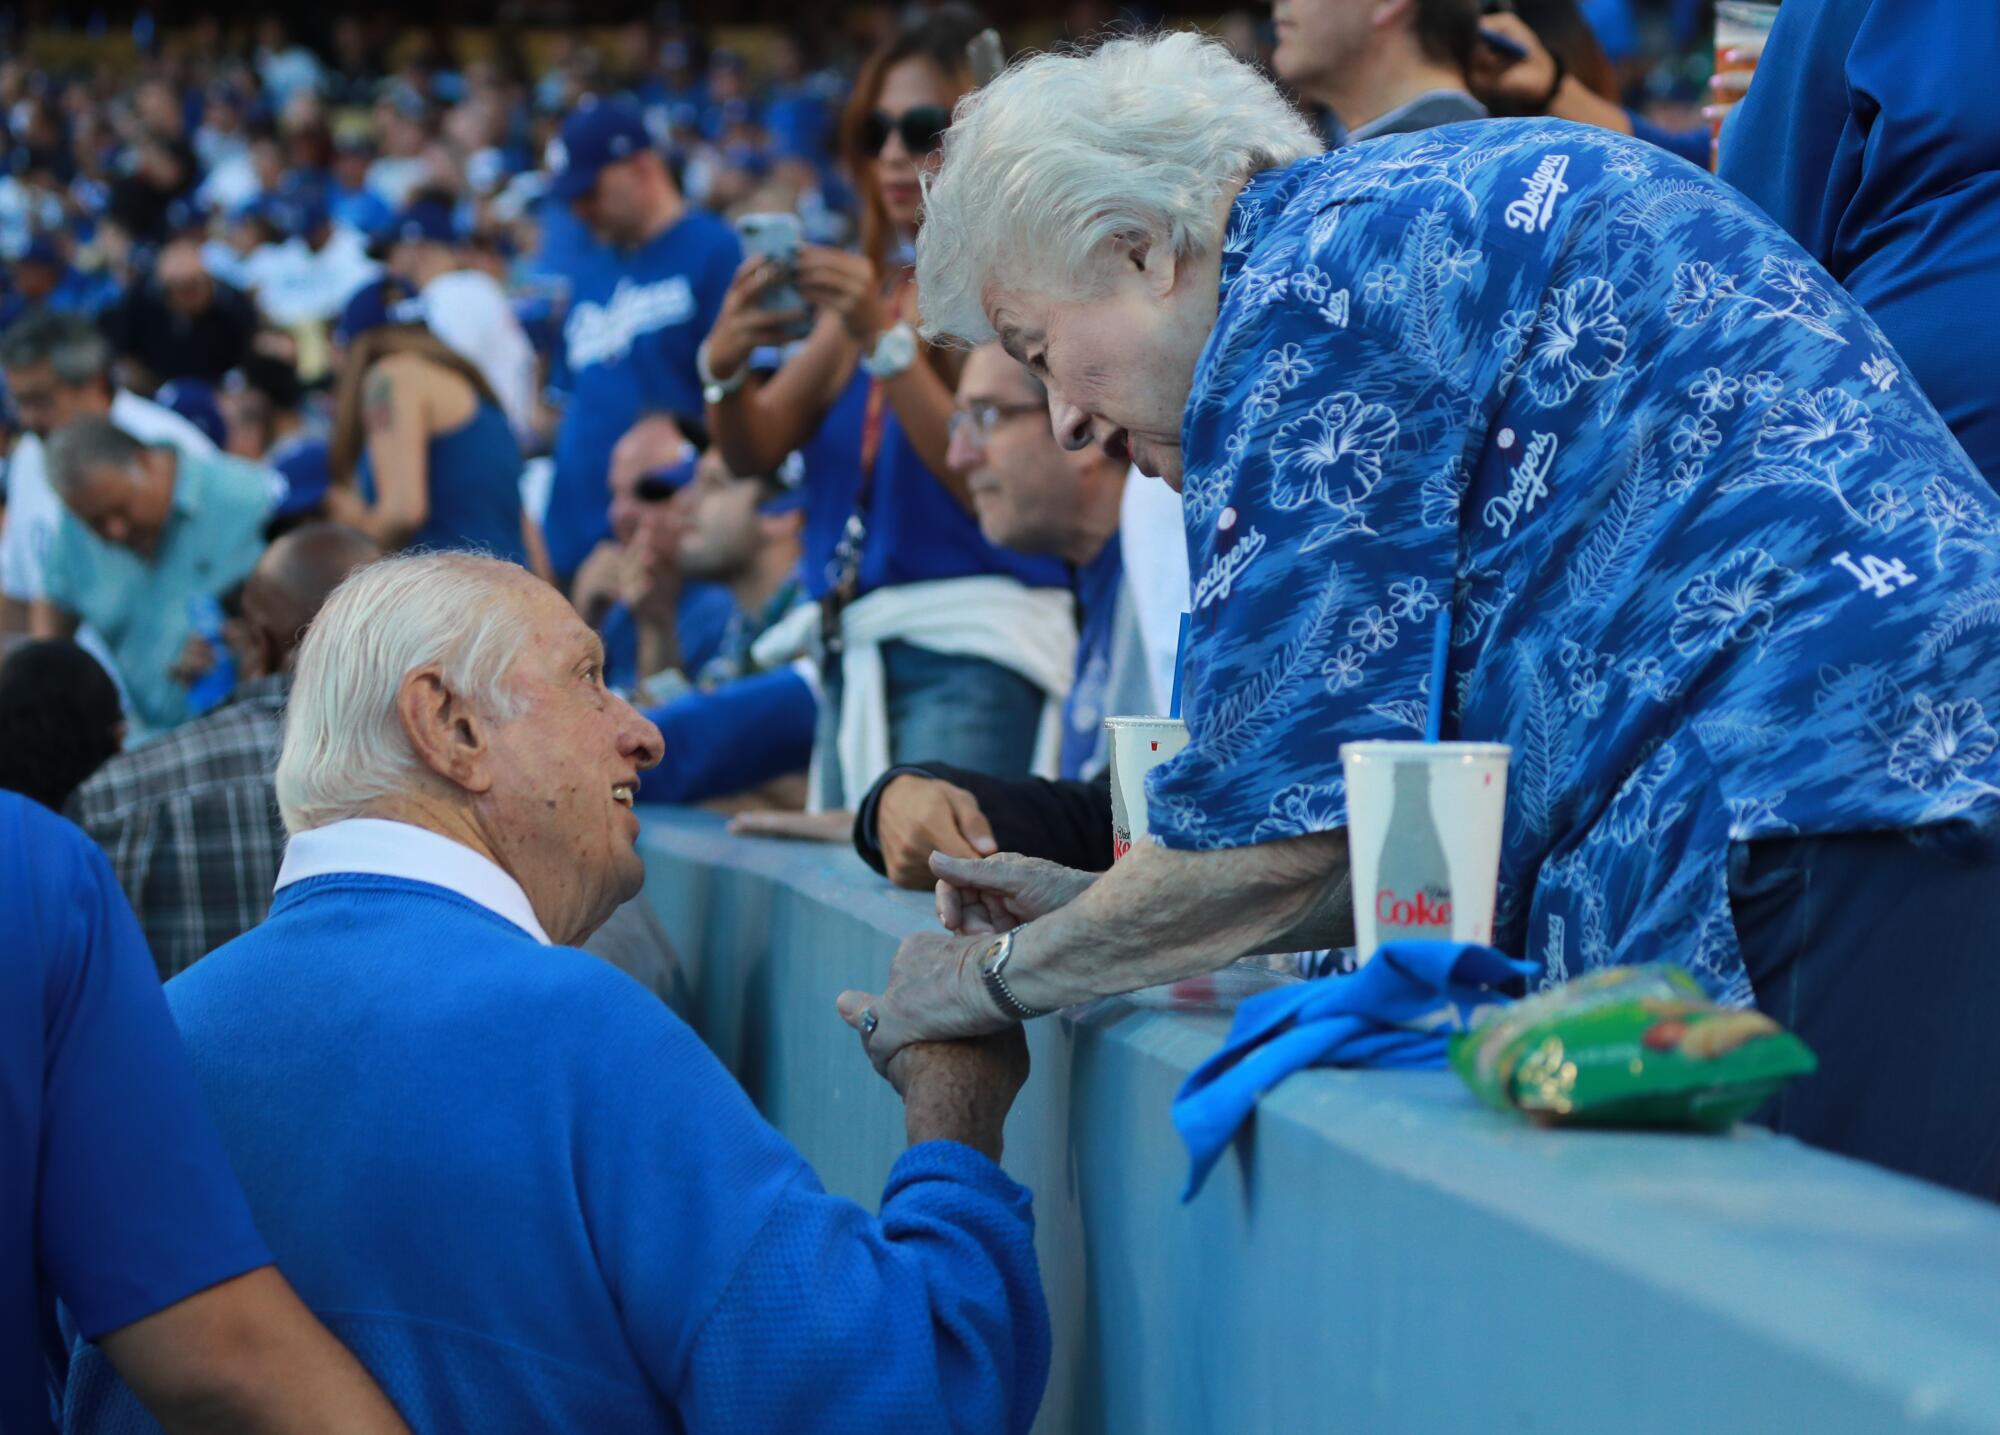 Tommy Lasorda holds Rosalind Wyman's hand and they talk in stadium stands.